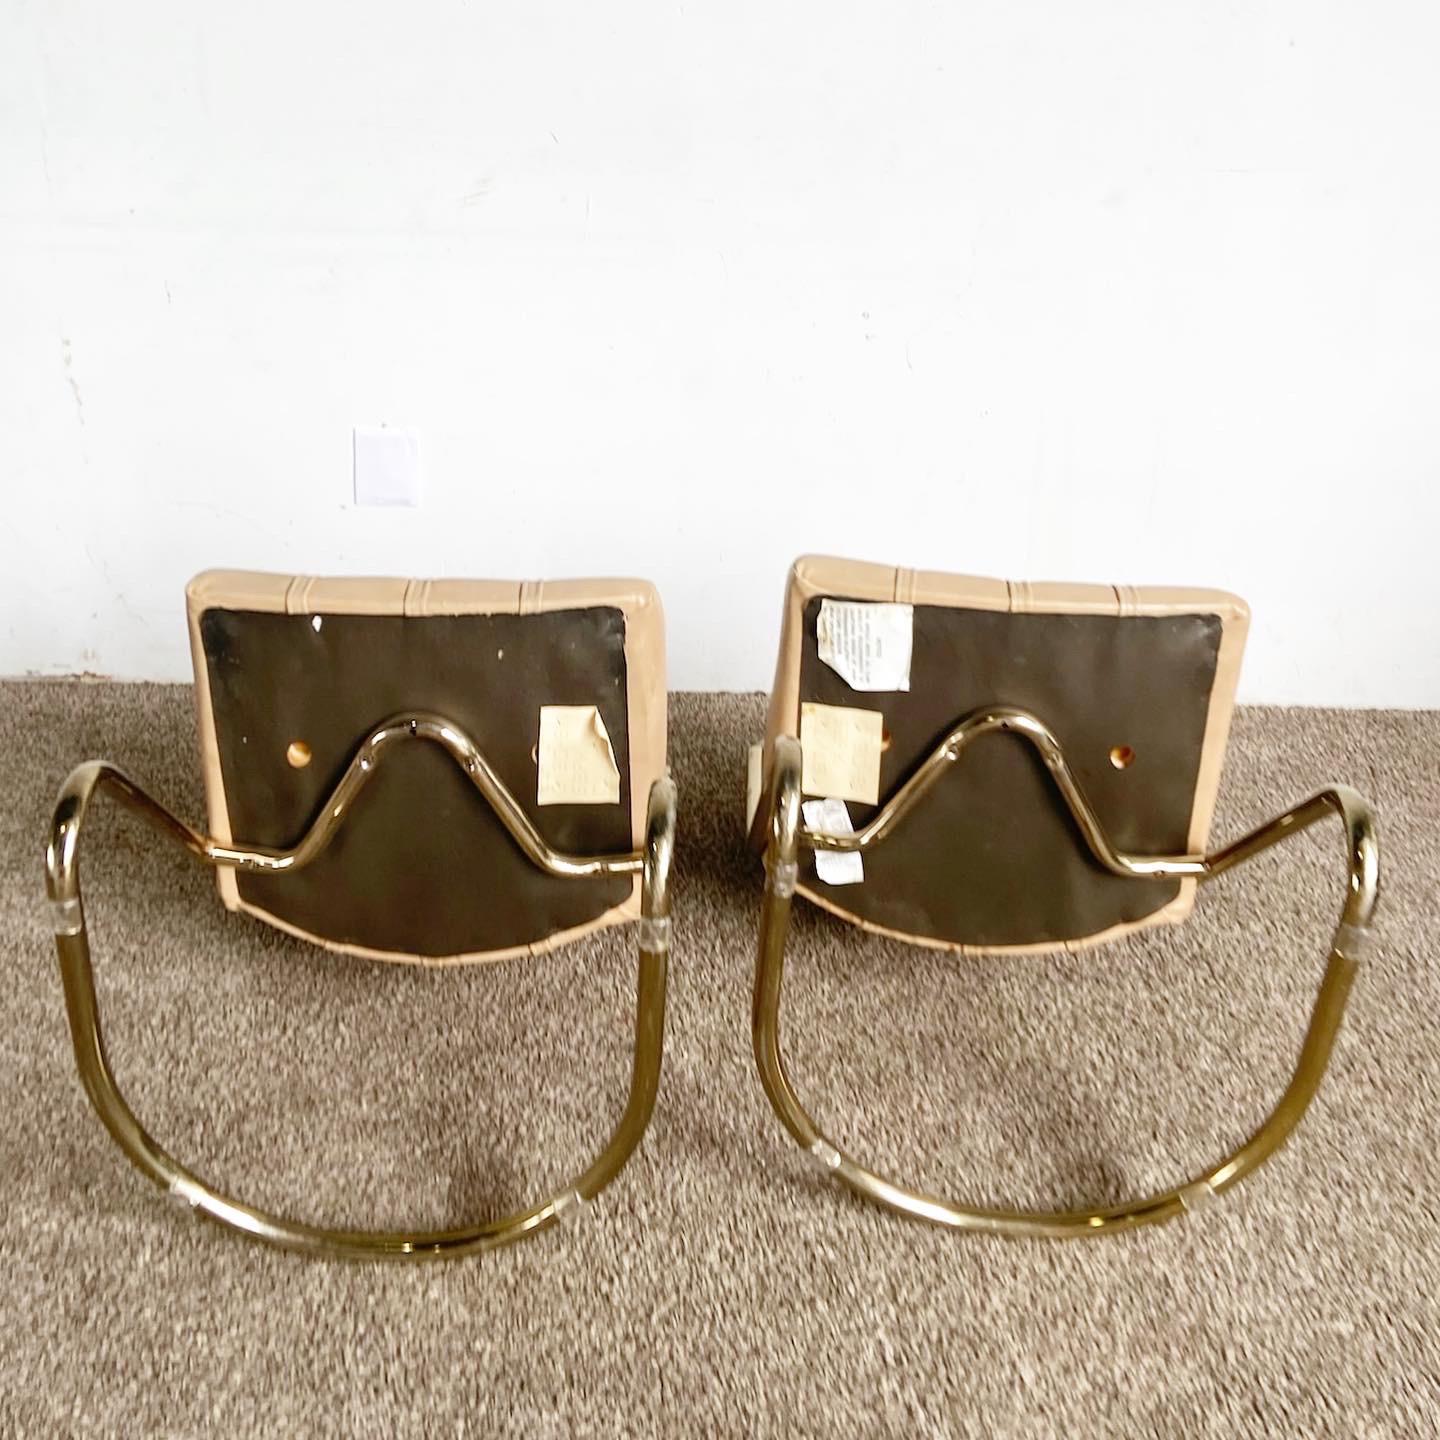 Late 20th Century Mid Century Modern Gold and Tan Tufted Cantilever Chairs by Chromcraft - a Pair For Sale